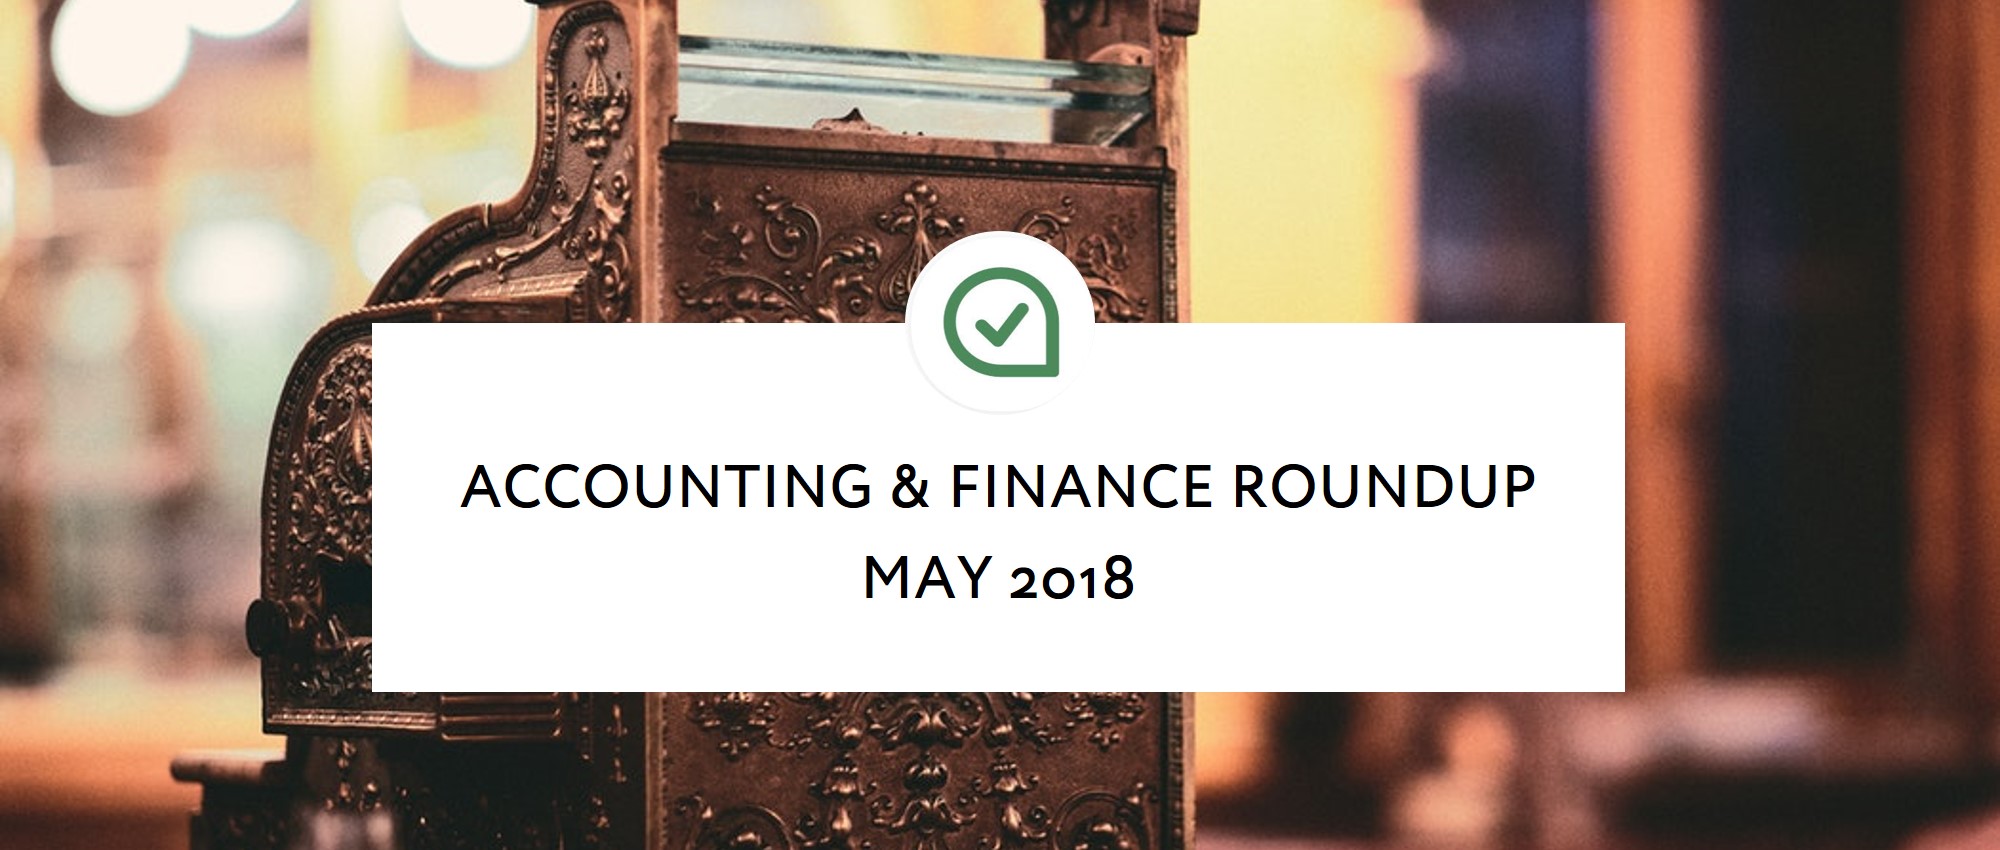 ApprovalMax Accounting and Finance Roundup May 2018